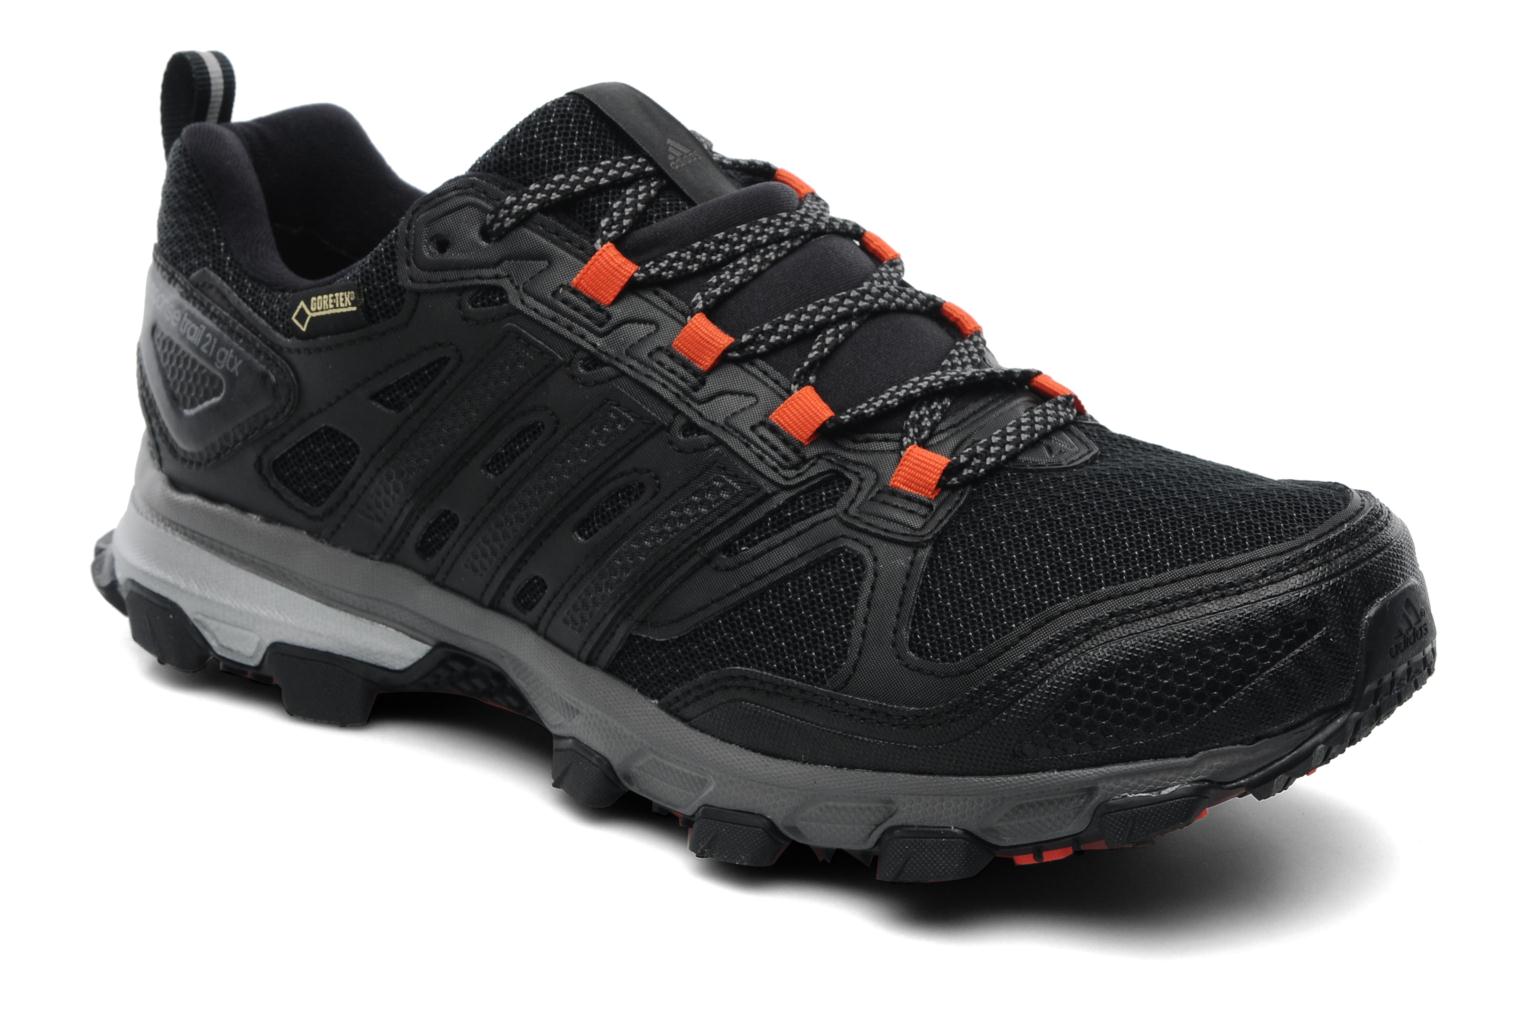 adidas chaussures trail response 21 homme